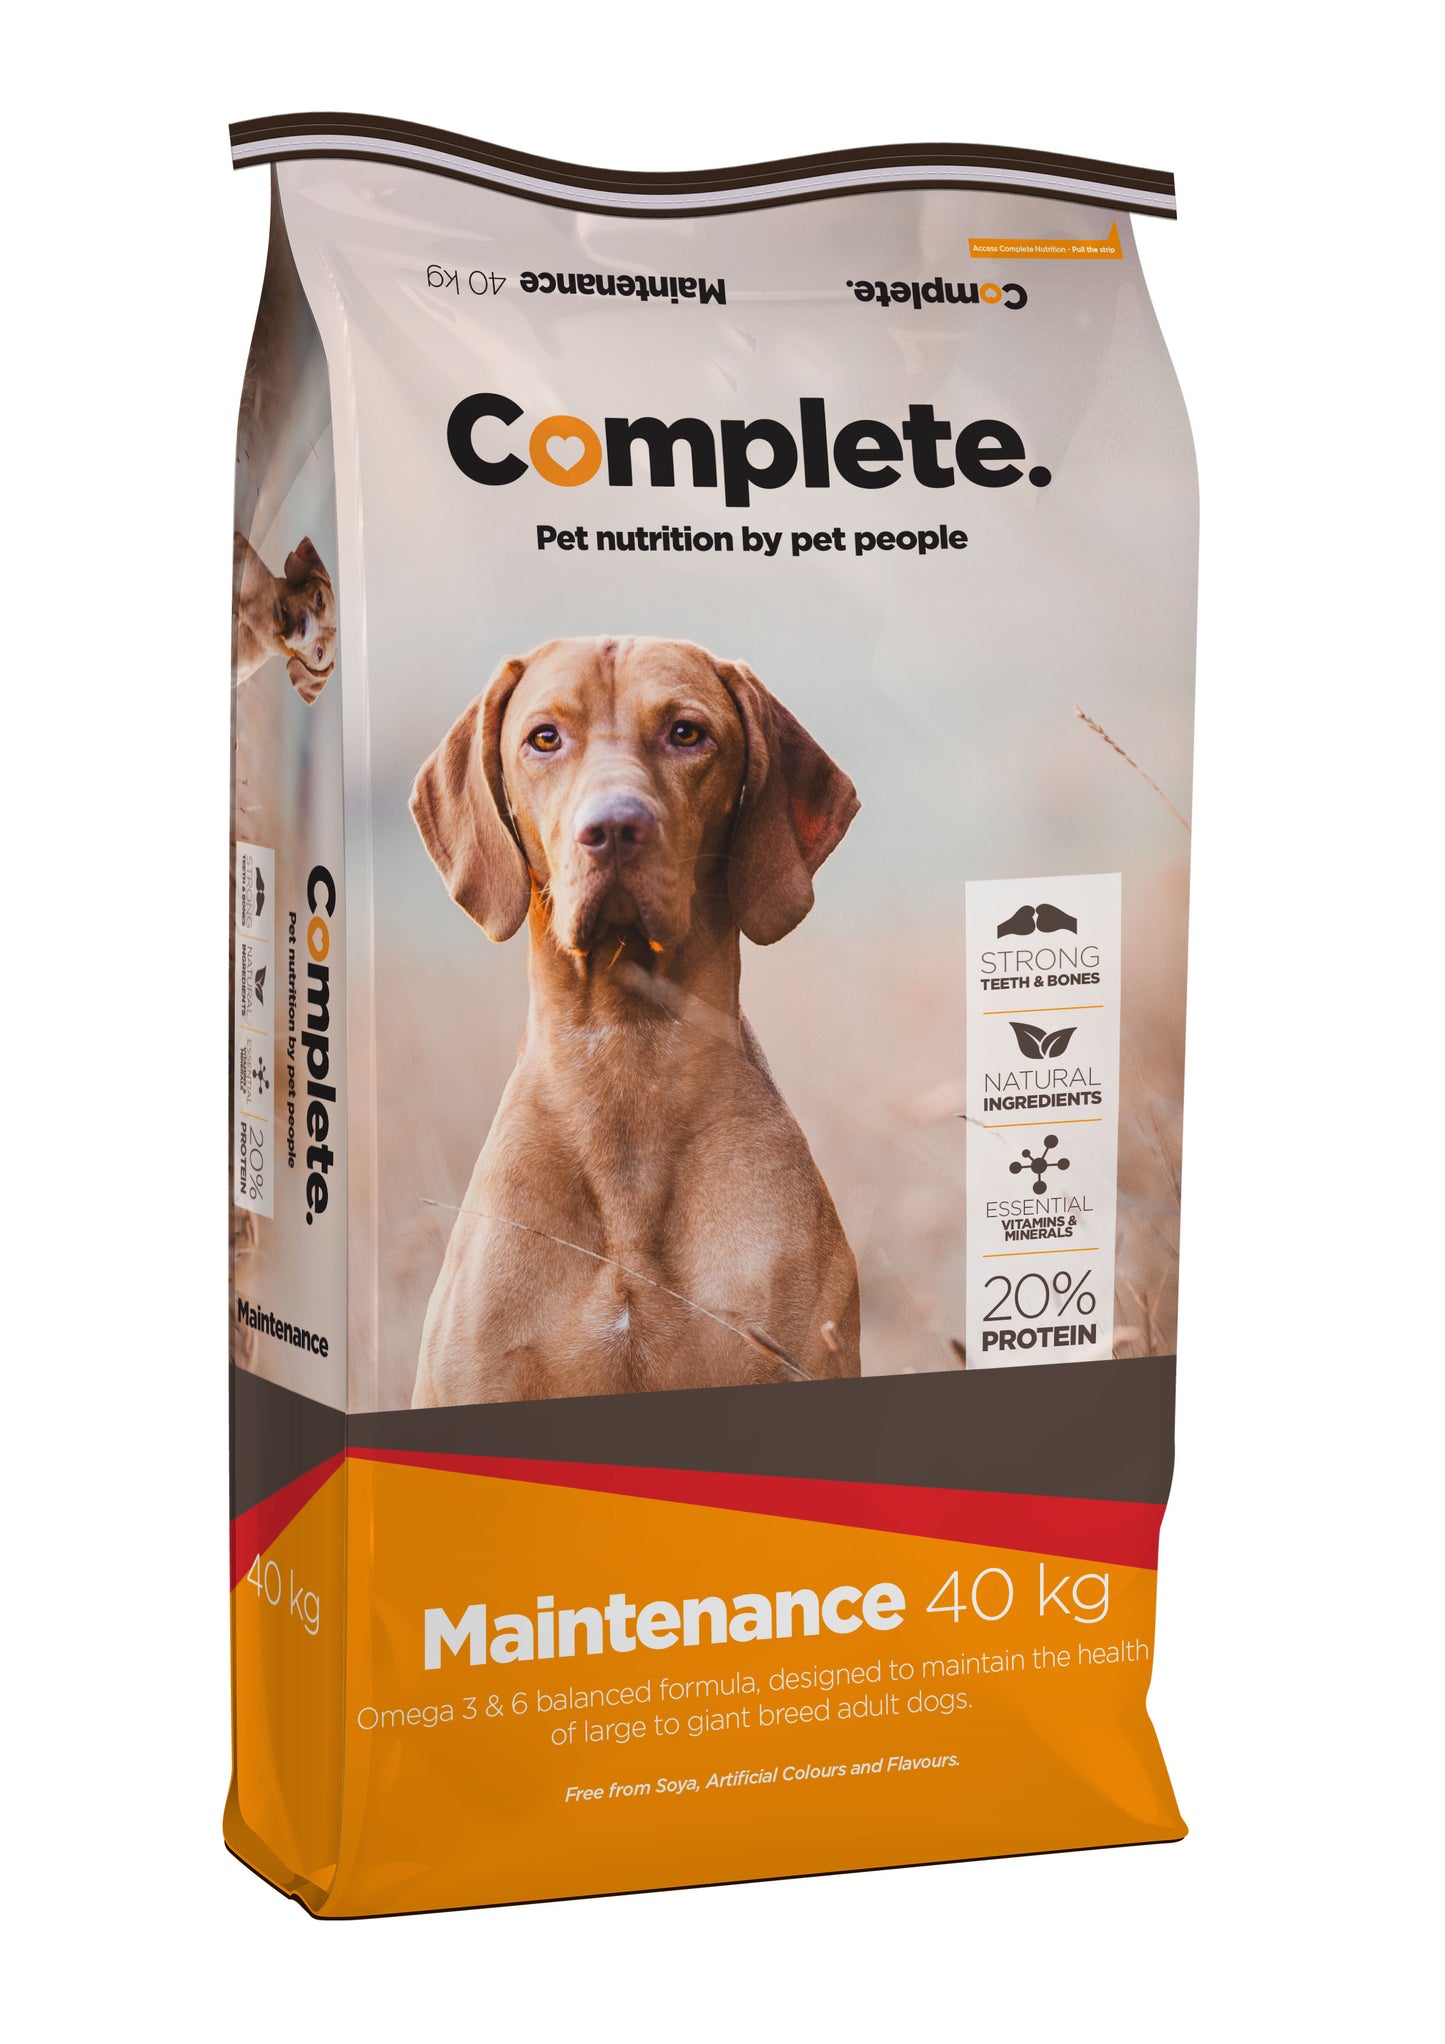 Maintenance 40kg Complete Pet Food For Large & Giant breed adult dogs from Pets Planet - South Africa’s No1 Online Pet Store for premium pet products, best pet store near me, Dog food, pet food, dog wet food, dog bed, dog beds, washable dog bed, takealot dog bed, plush dog bed, Complete Pet Nutrition, Complete pet nutrition dog food, hills dog food, optimizor dog food, royal canin dog food, jock dog food, bobtail dog food, canine cuisine, acana dog food, best dog food, dog food near me, best dog food brands